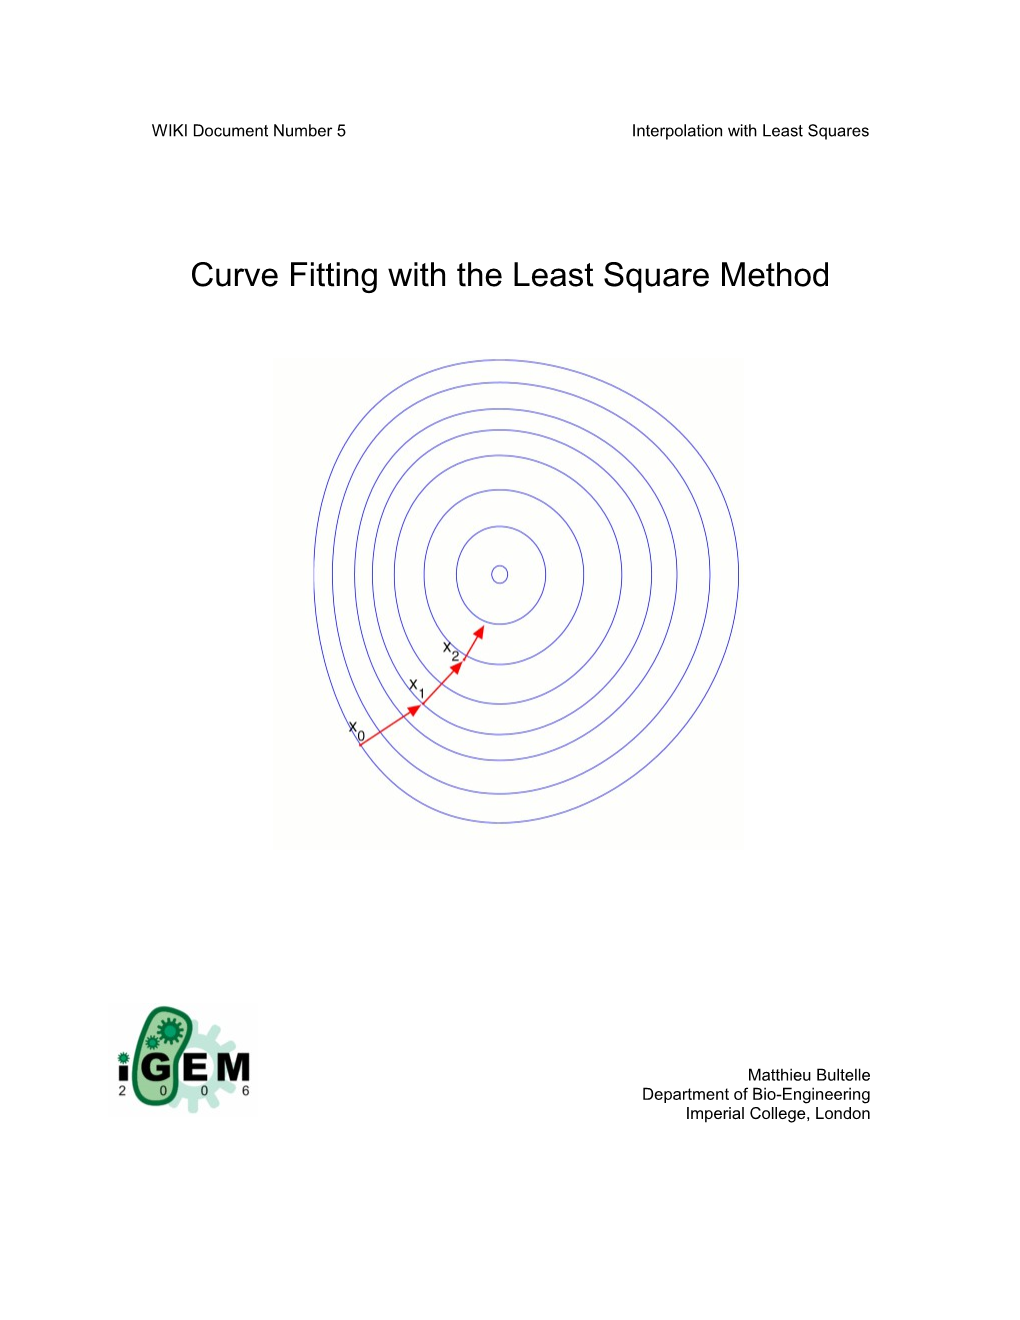 A Form of Curve Fitting with the Least Square Method